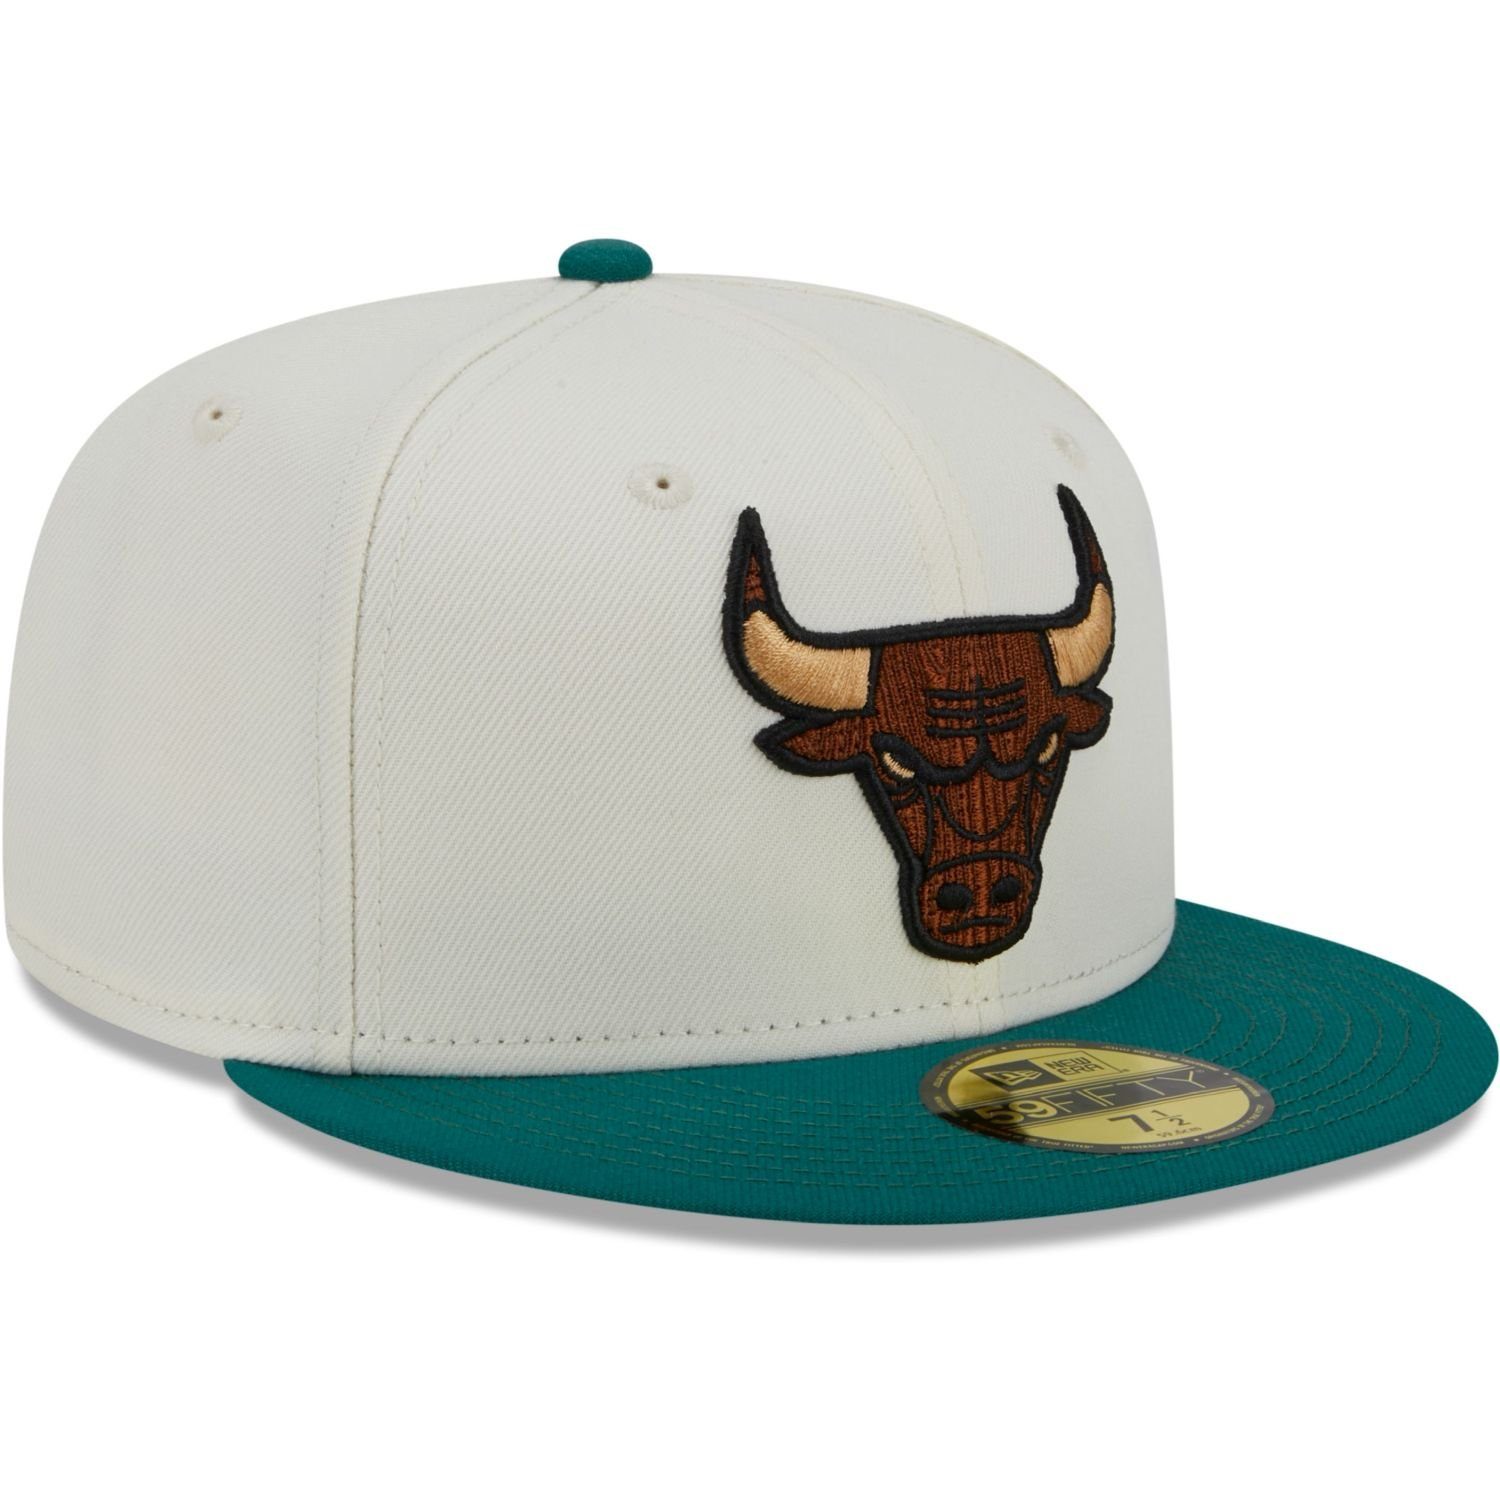 New Cap Chicago Era Fitted 59Fifty Bulls CAMP